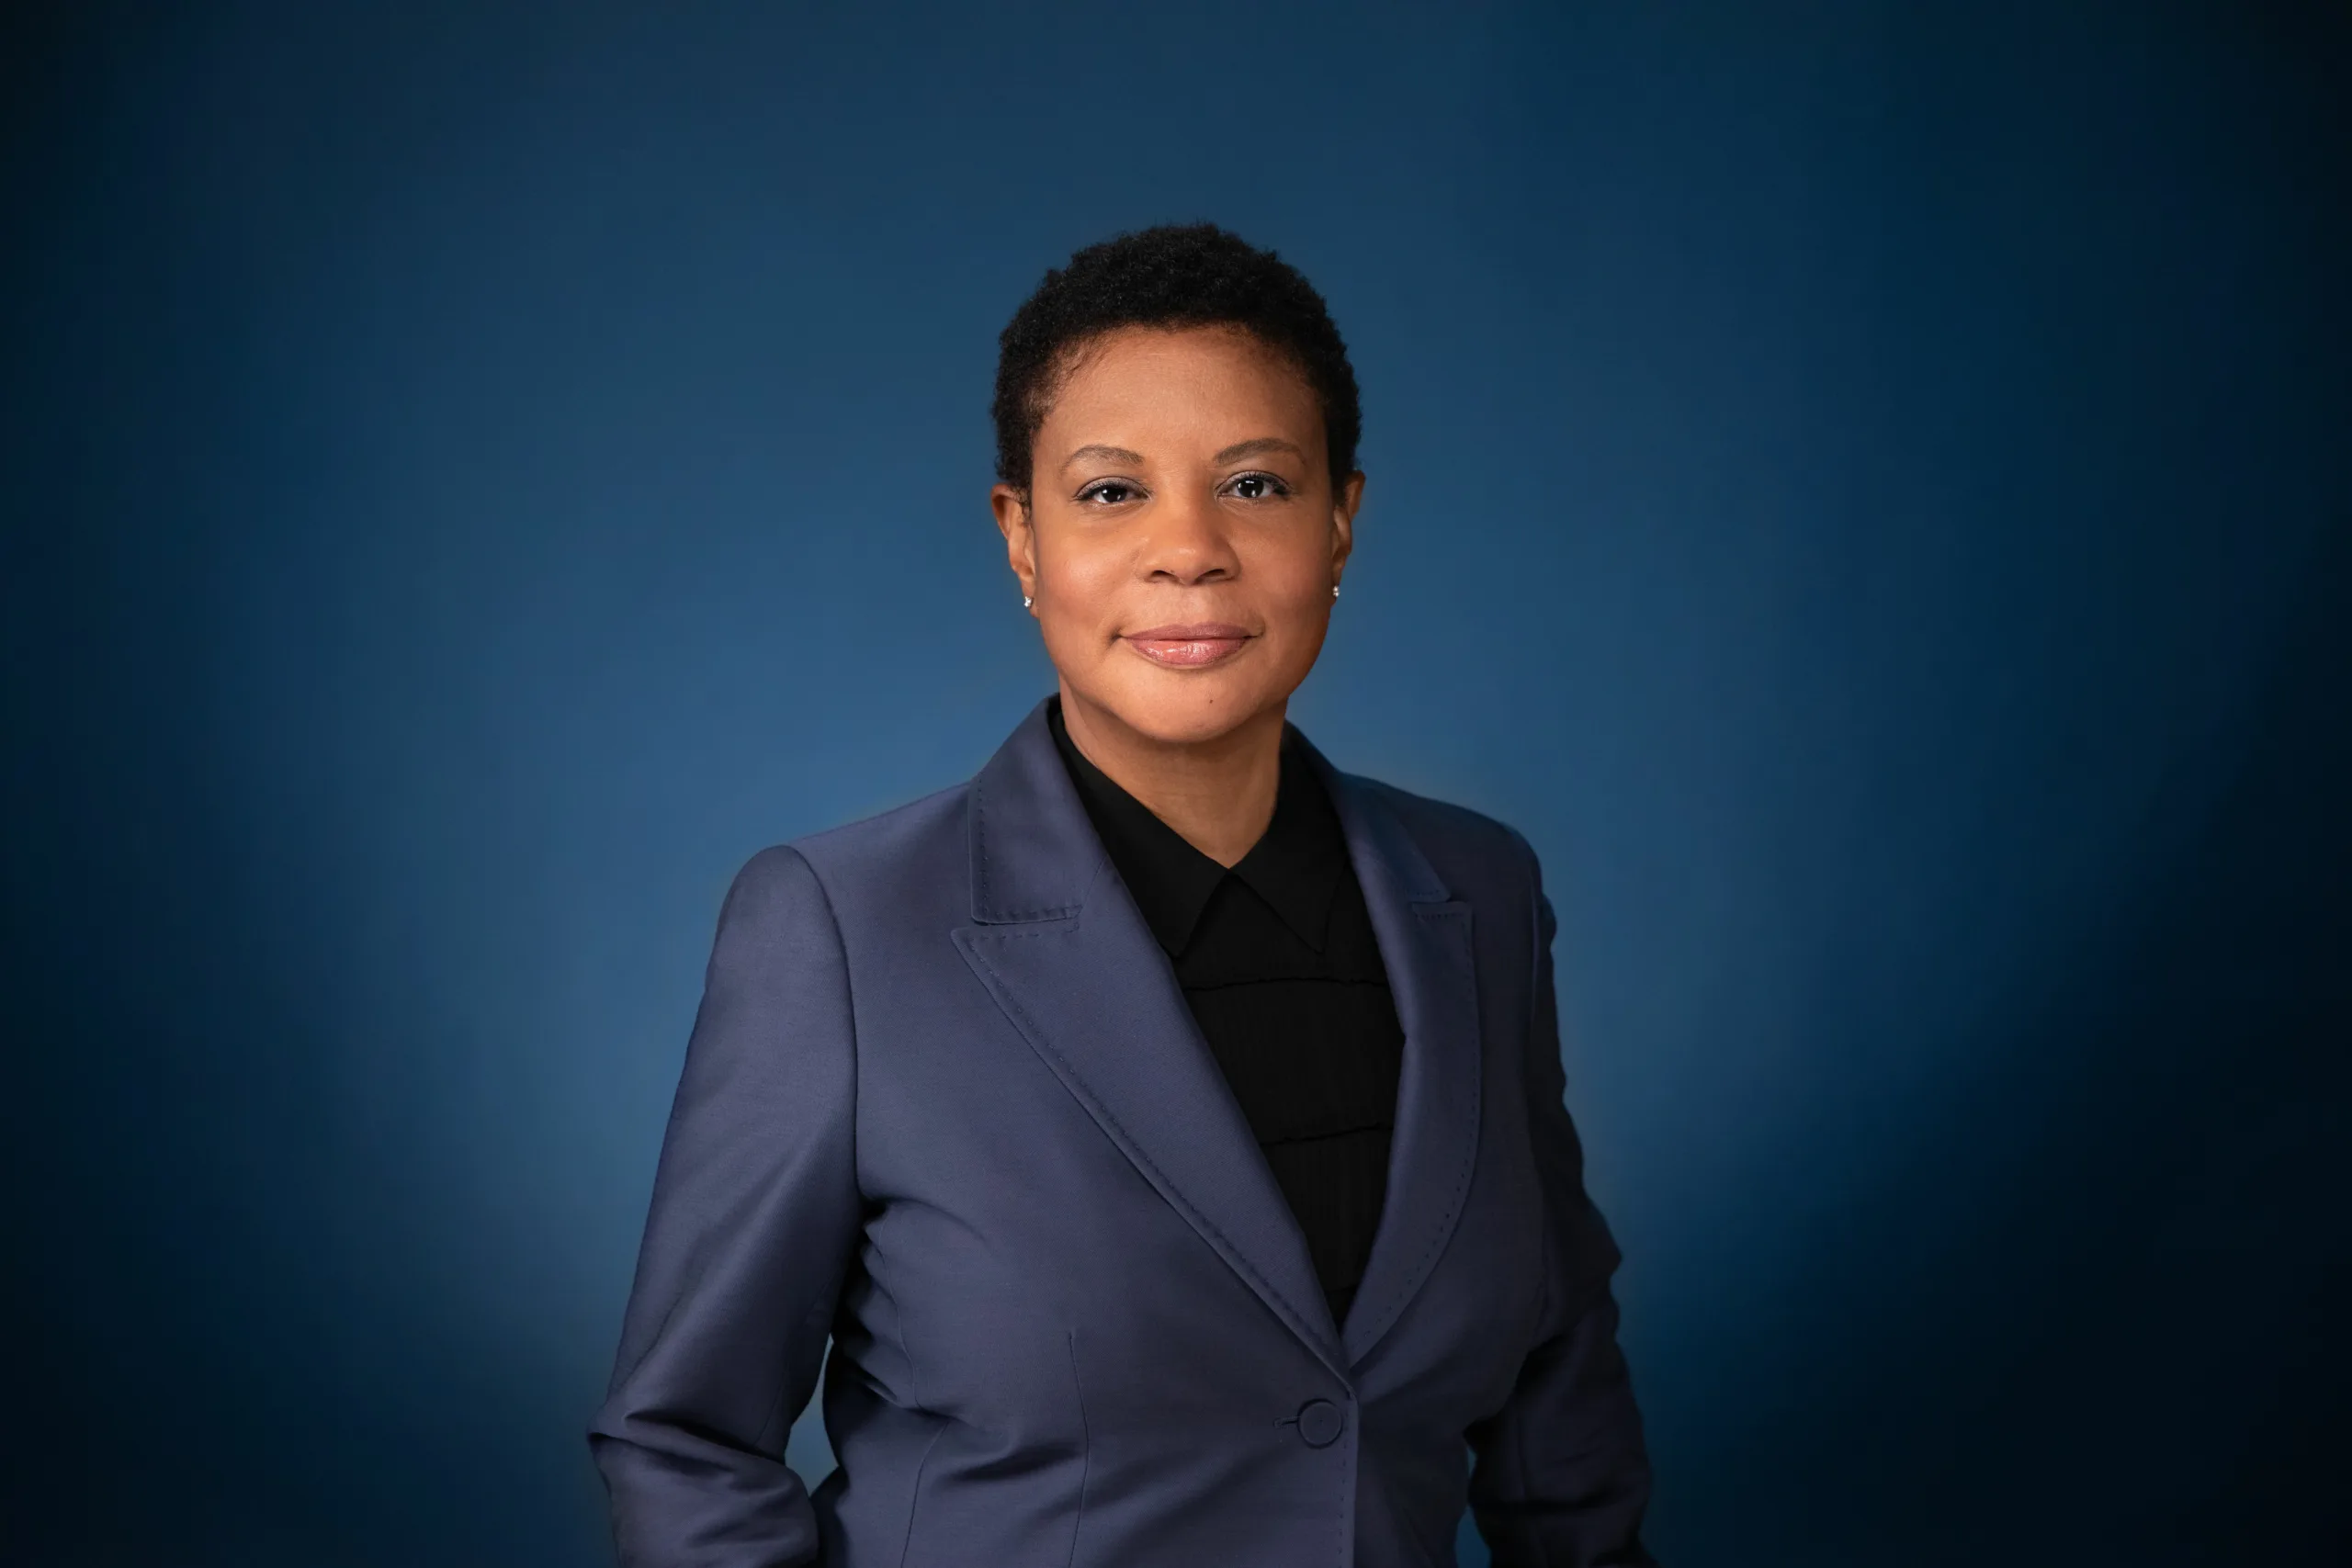 Alondra Nelson, Acclaimed Scholar and Policy Advisor, Joins Innocence Project Board of Directors